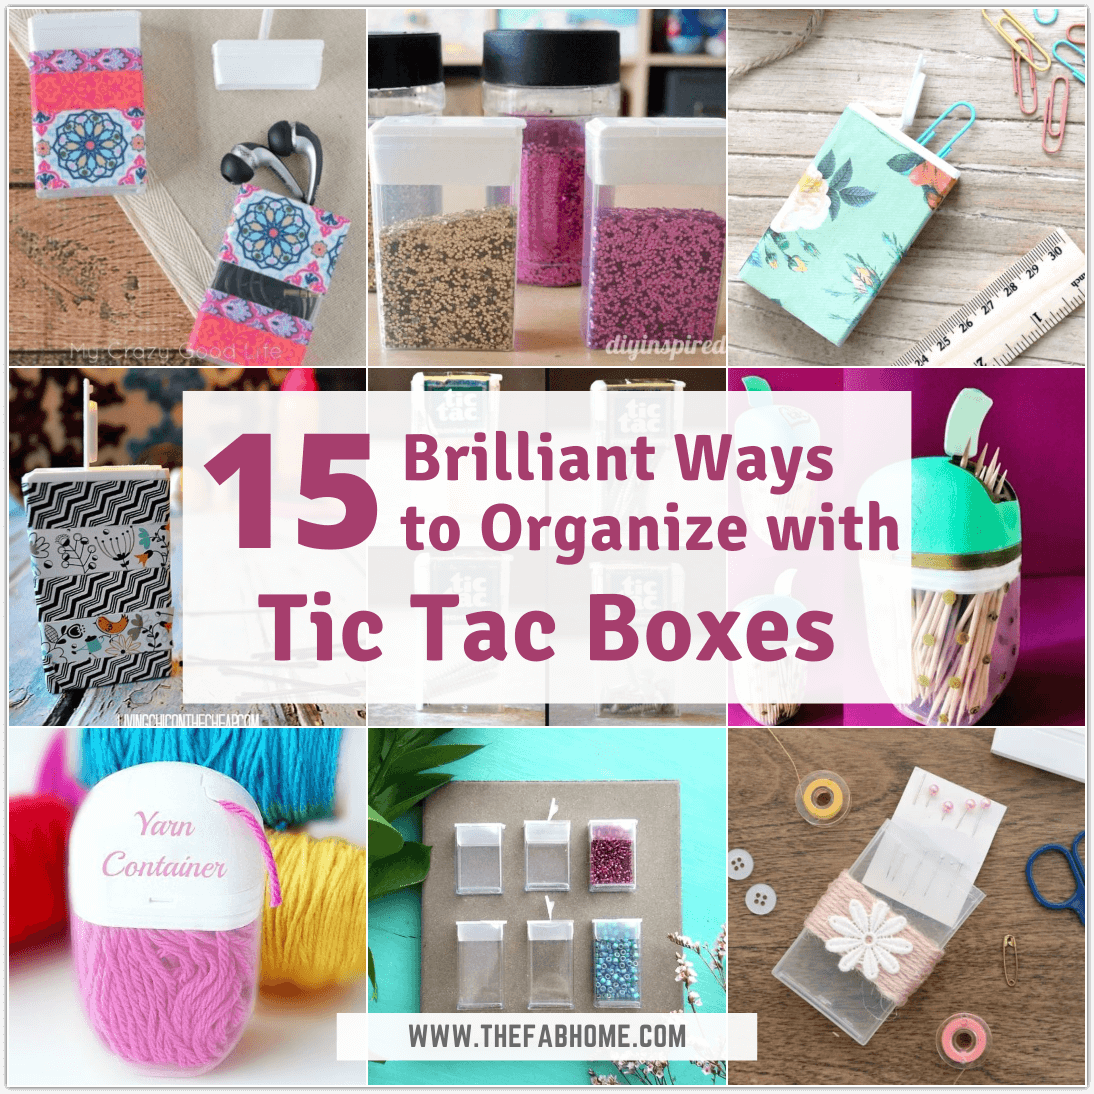 Did you think Tic Tac Boxes were too tiny to be useful? Not at all, as proved through these genius Ways to Organize with Tic Tac Boxes!